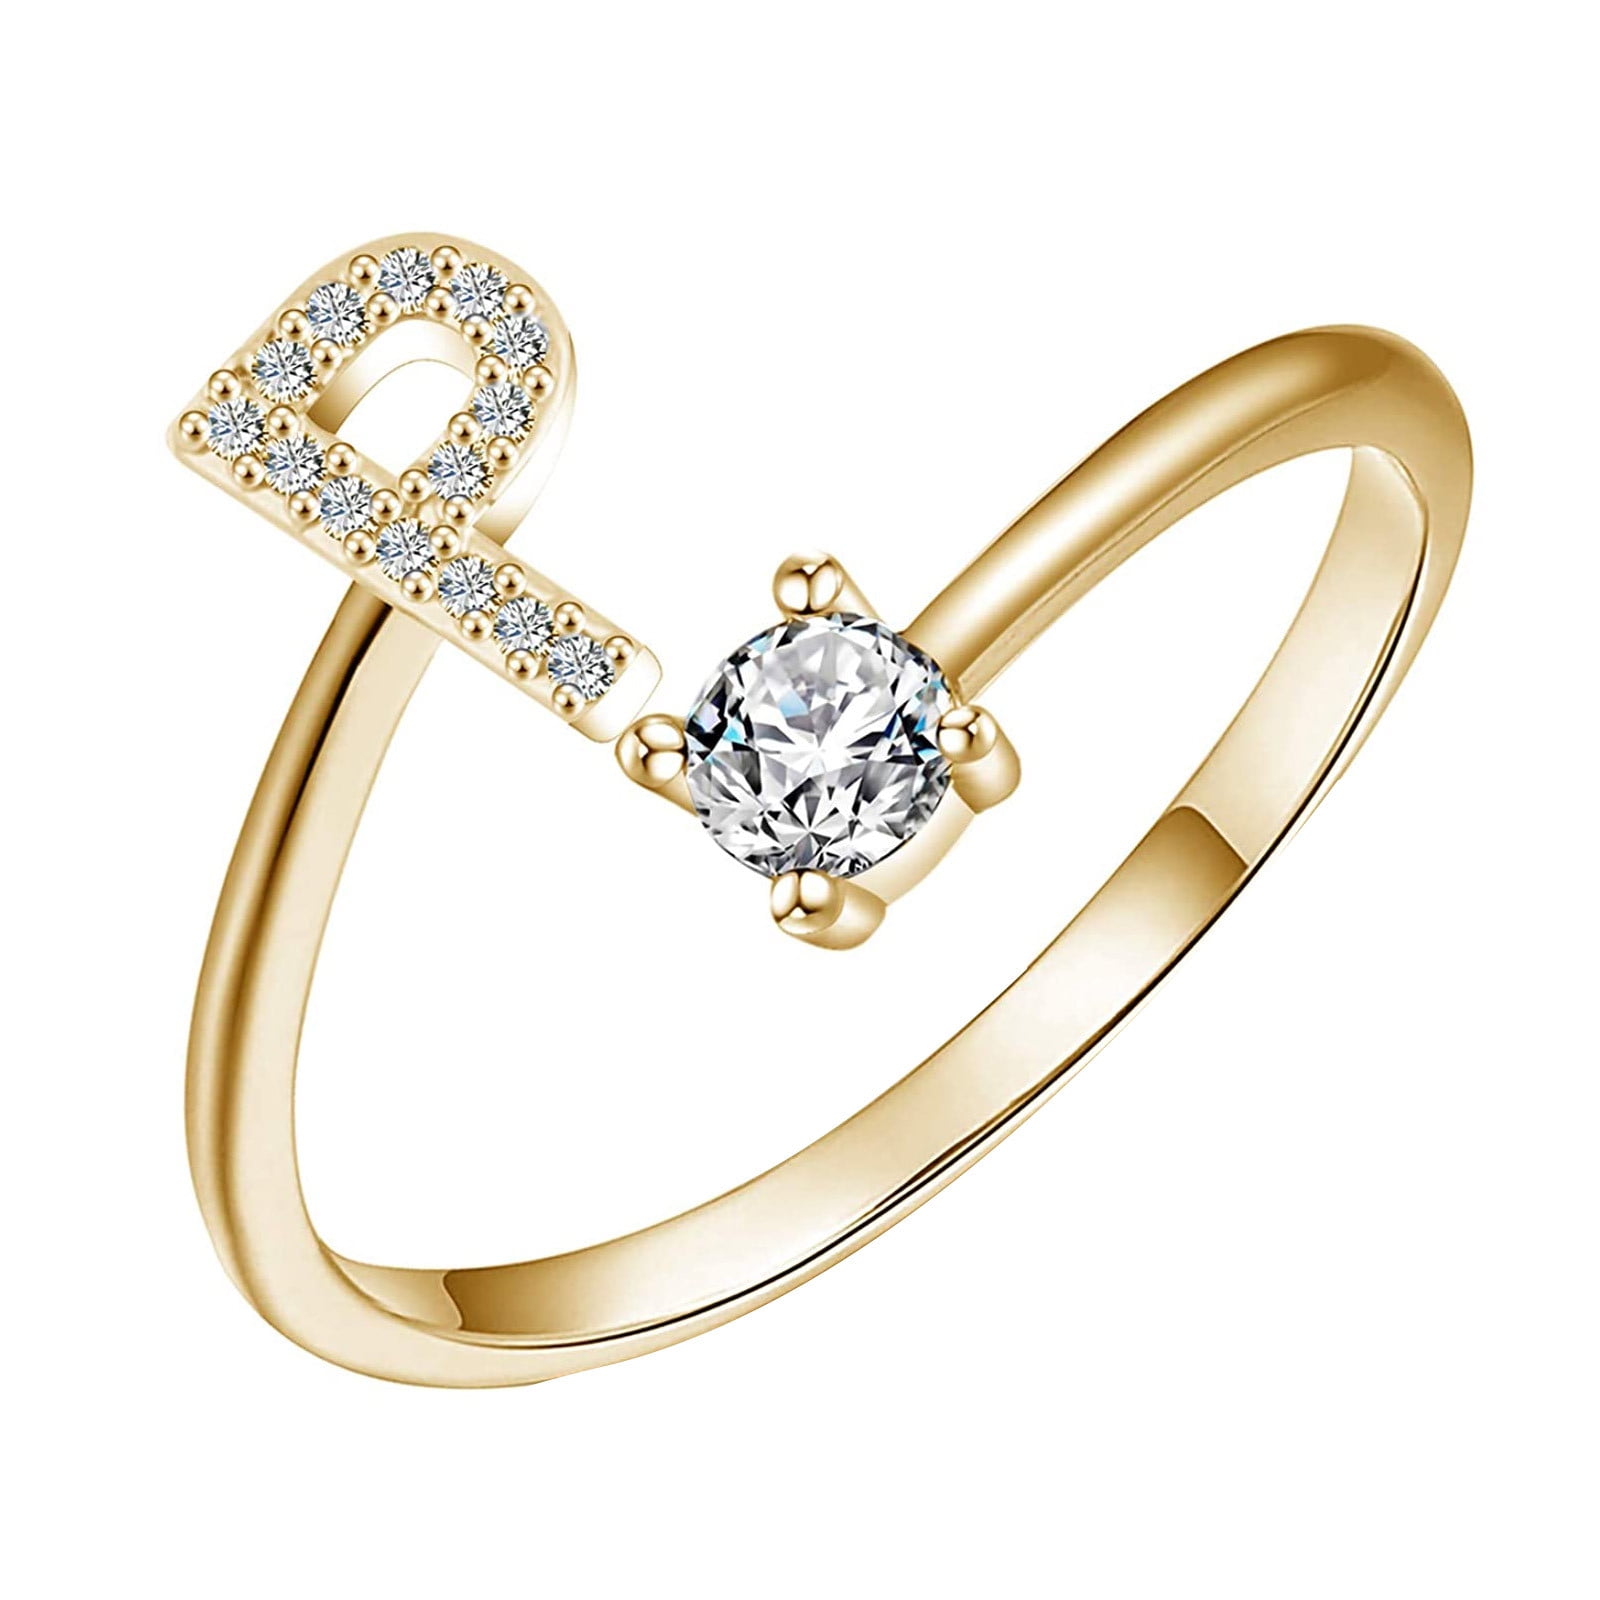 Women's Statement Rings in 14K Gold – NORM JEWELS